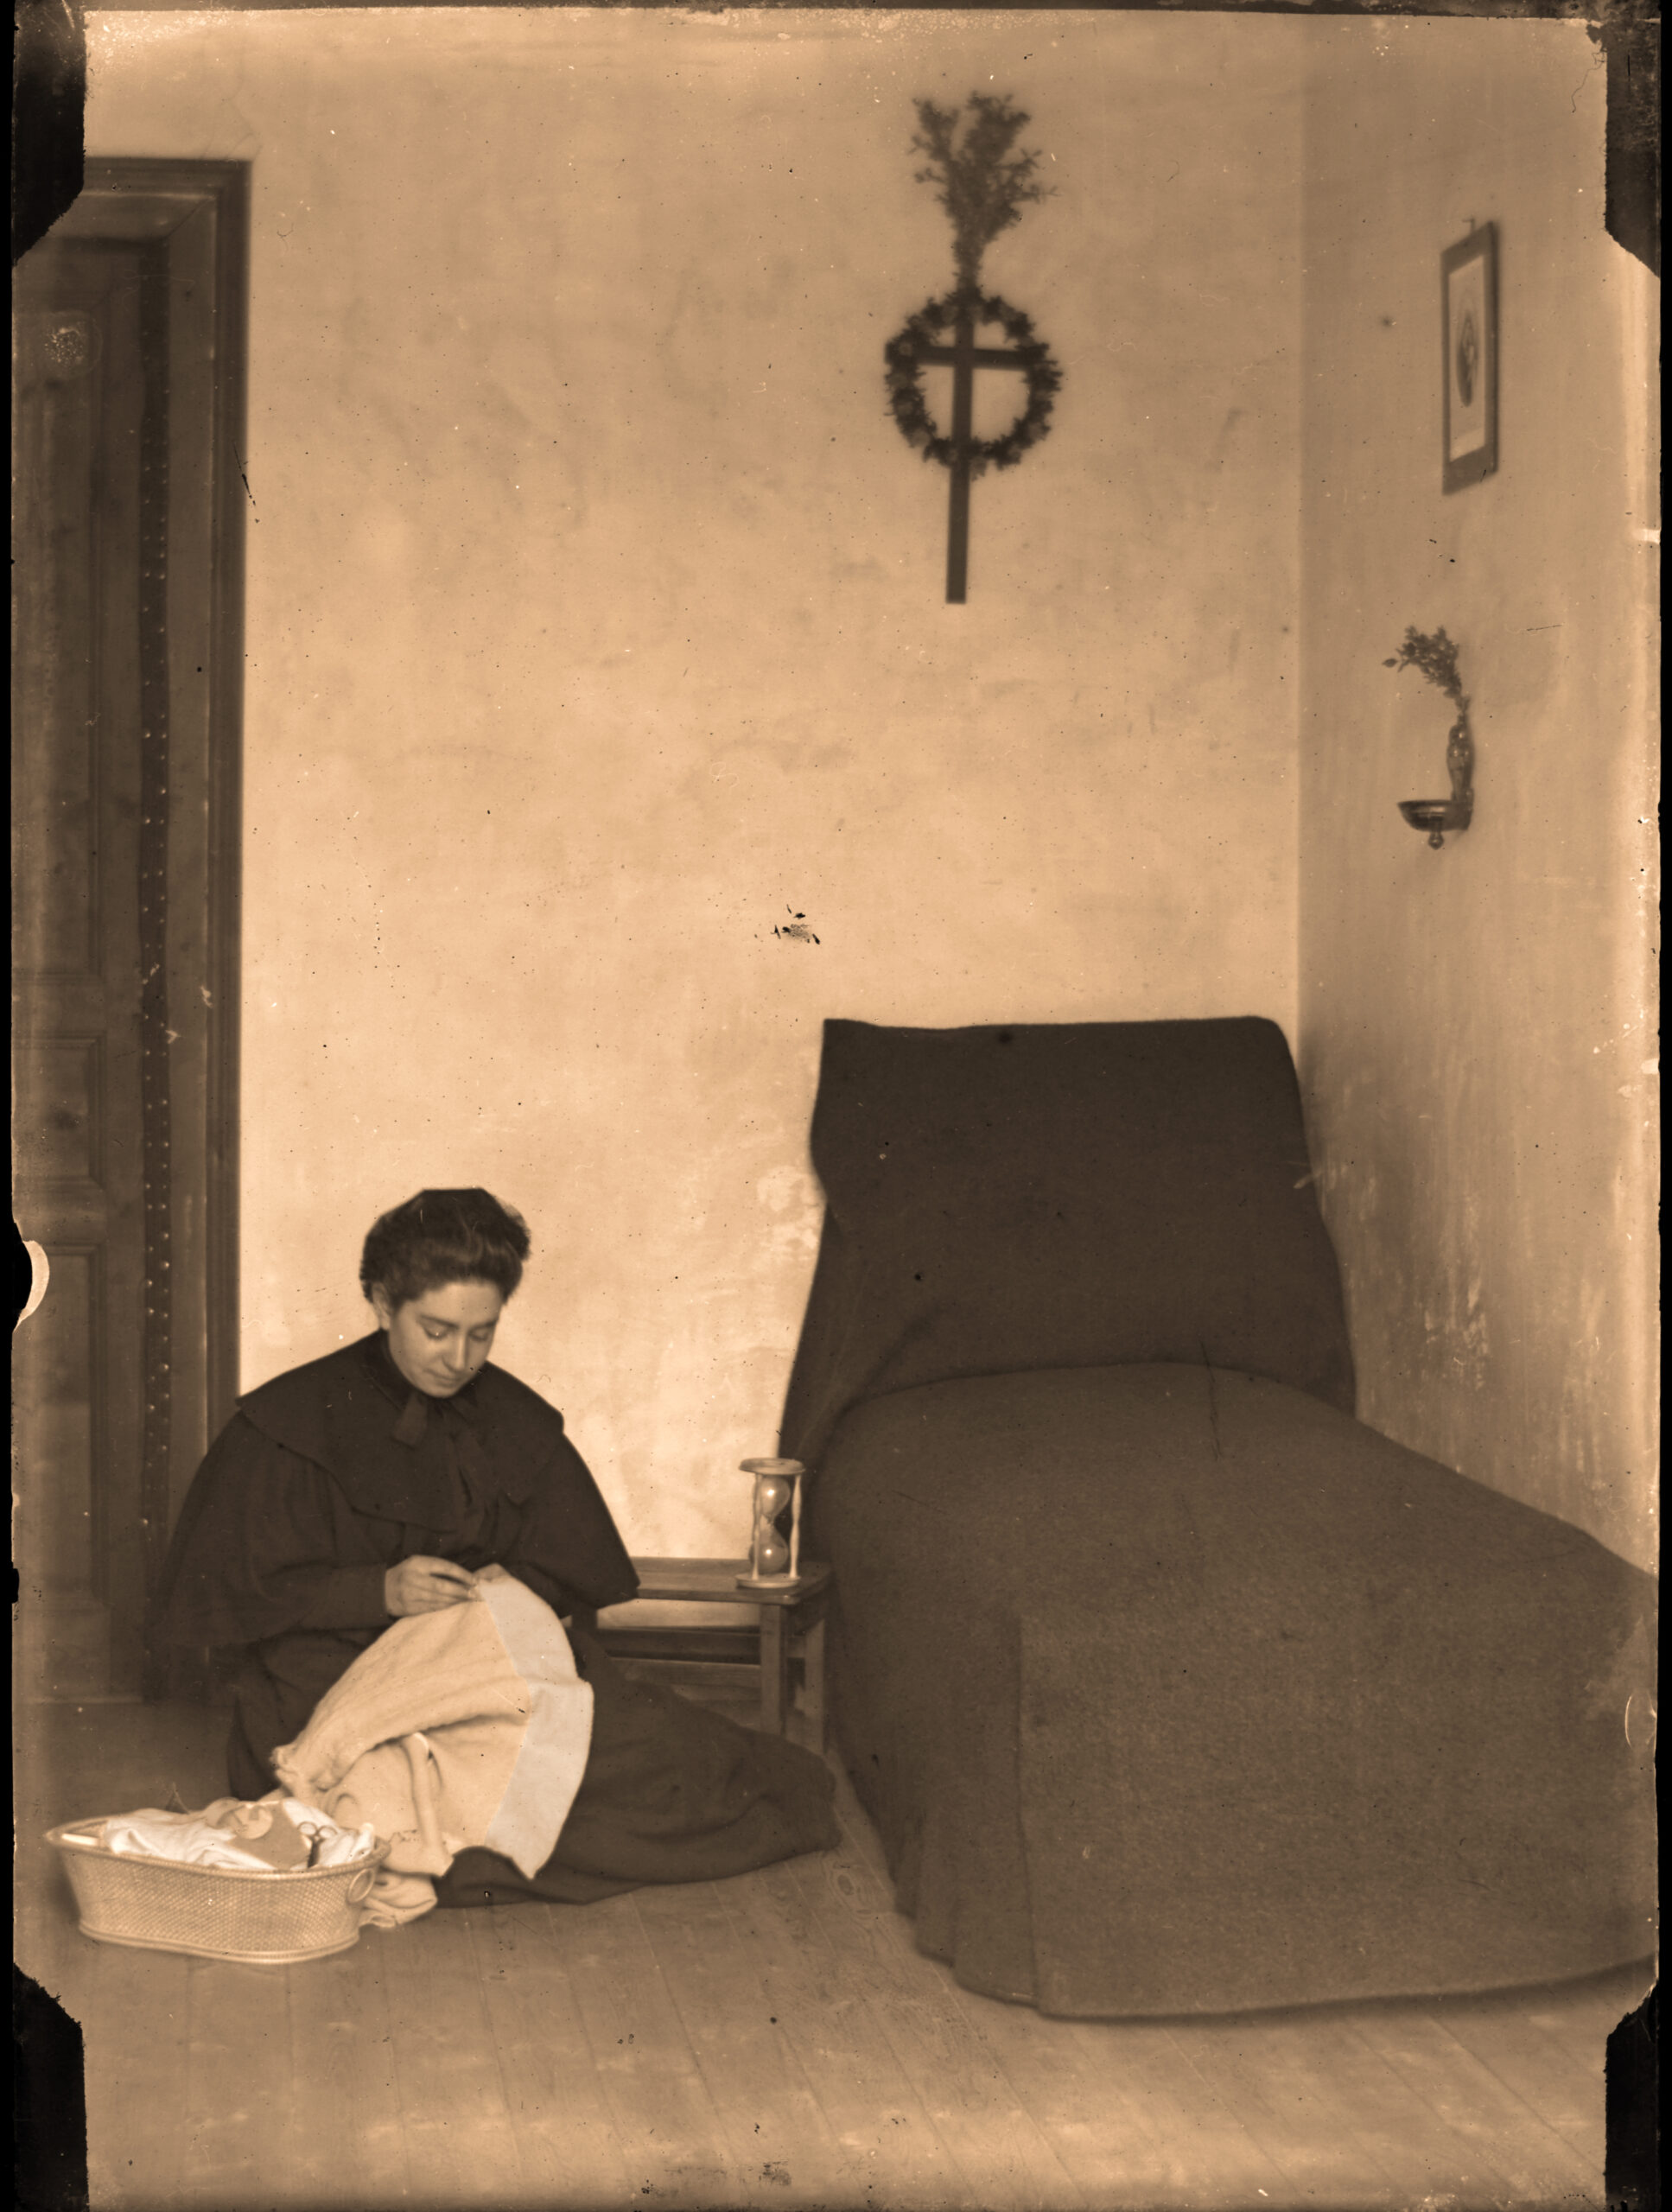 Image of Therese's second cell